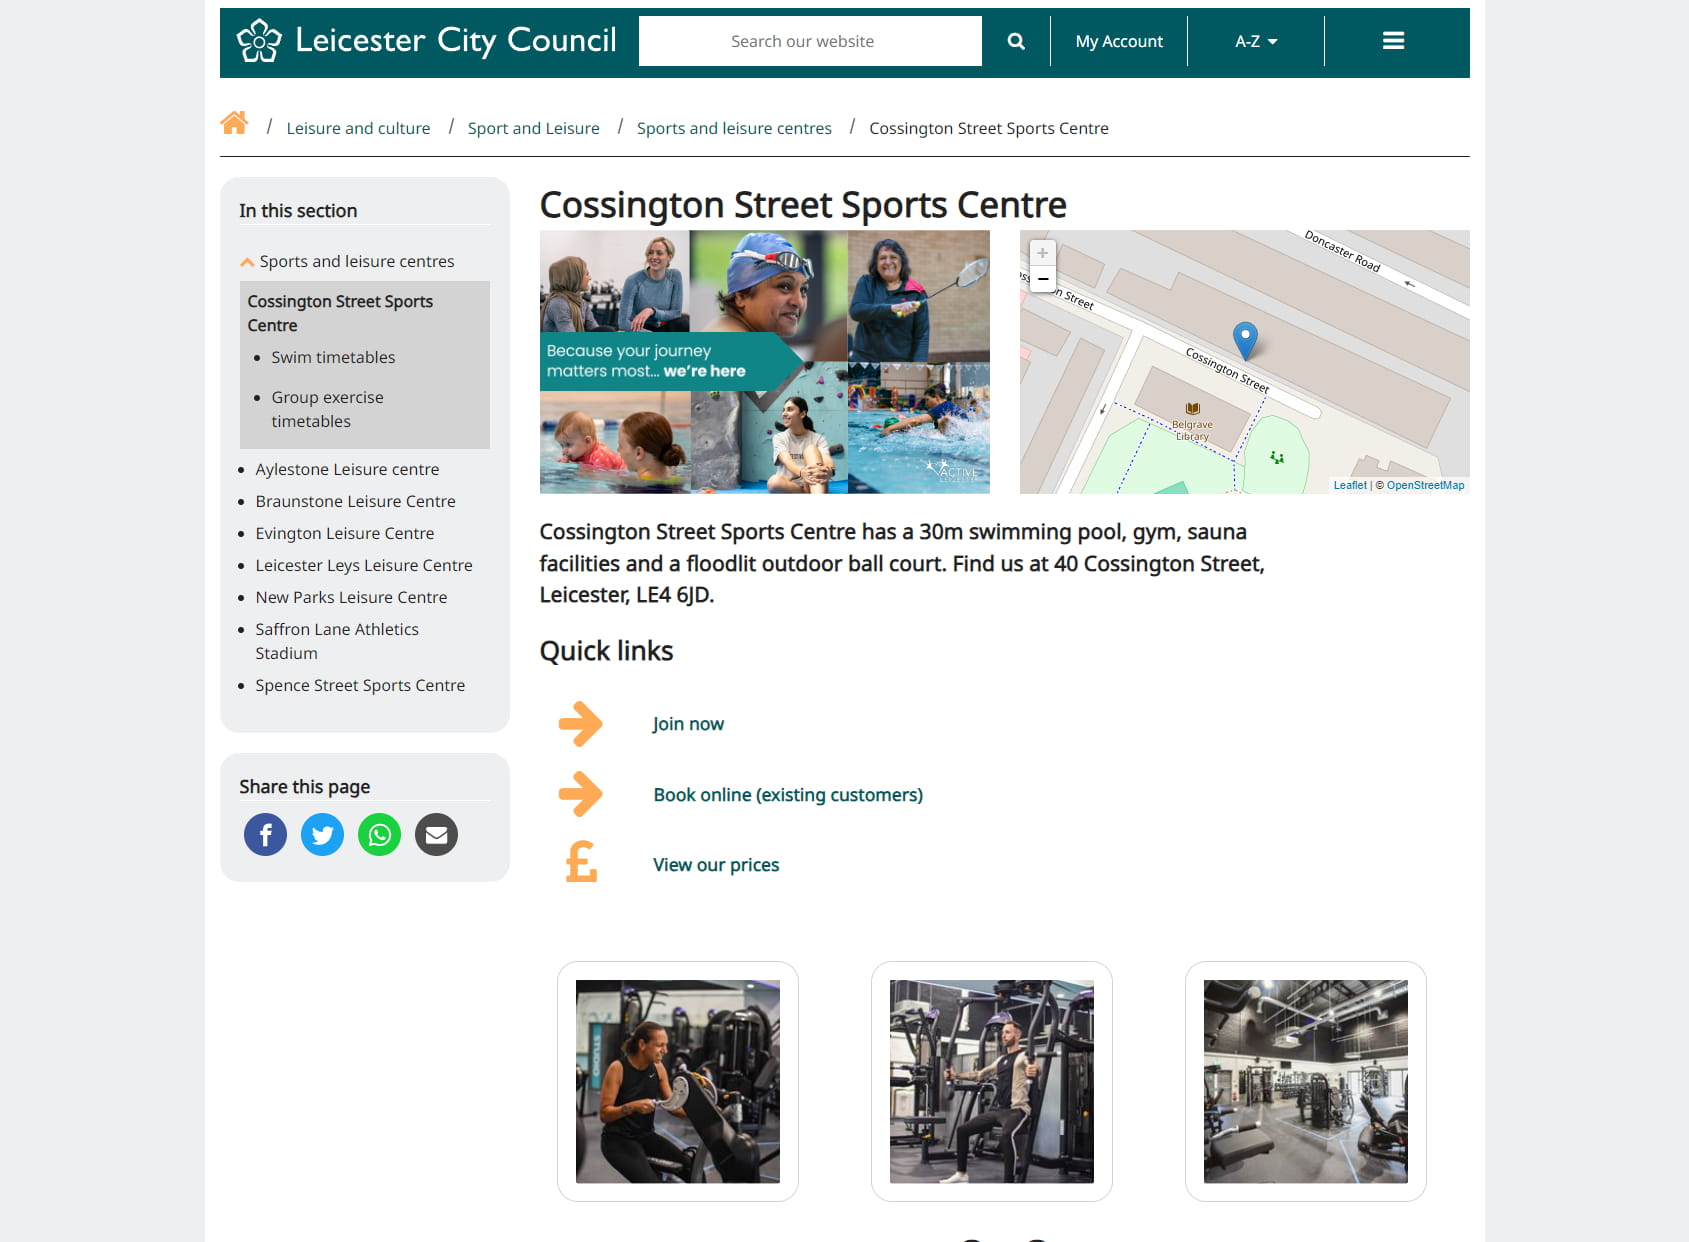 Active Leicester - Cossington Street Sports Centre